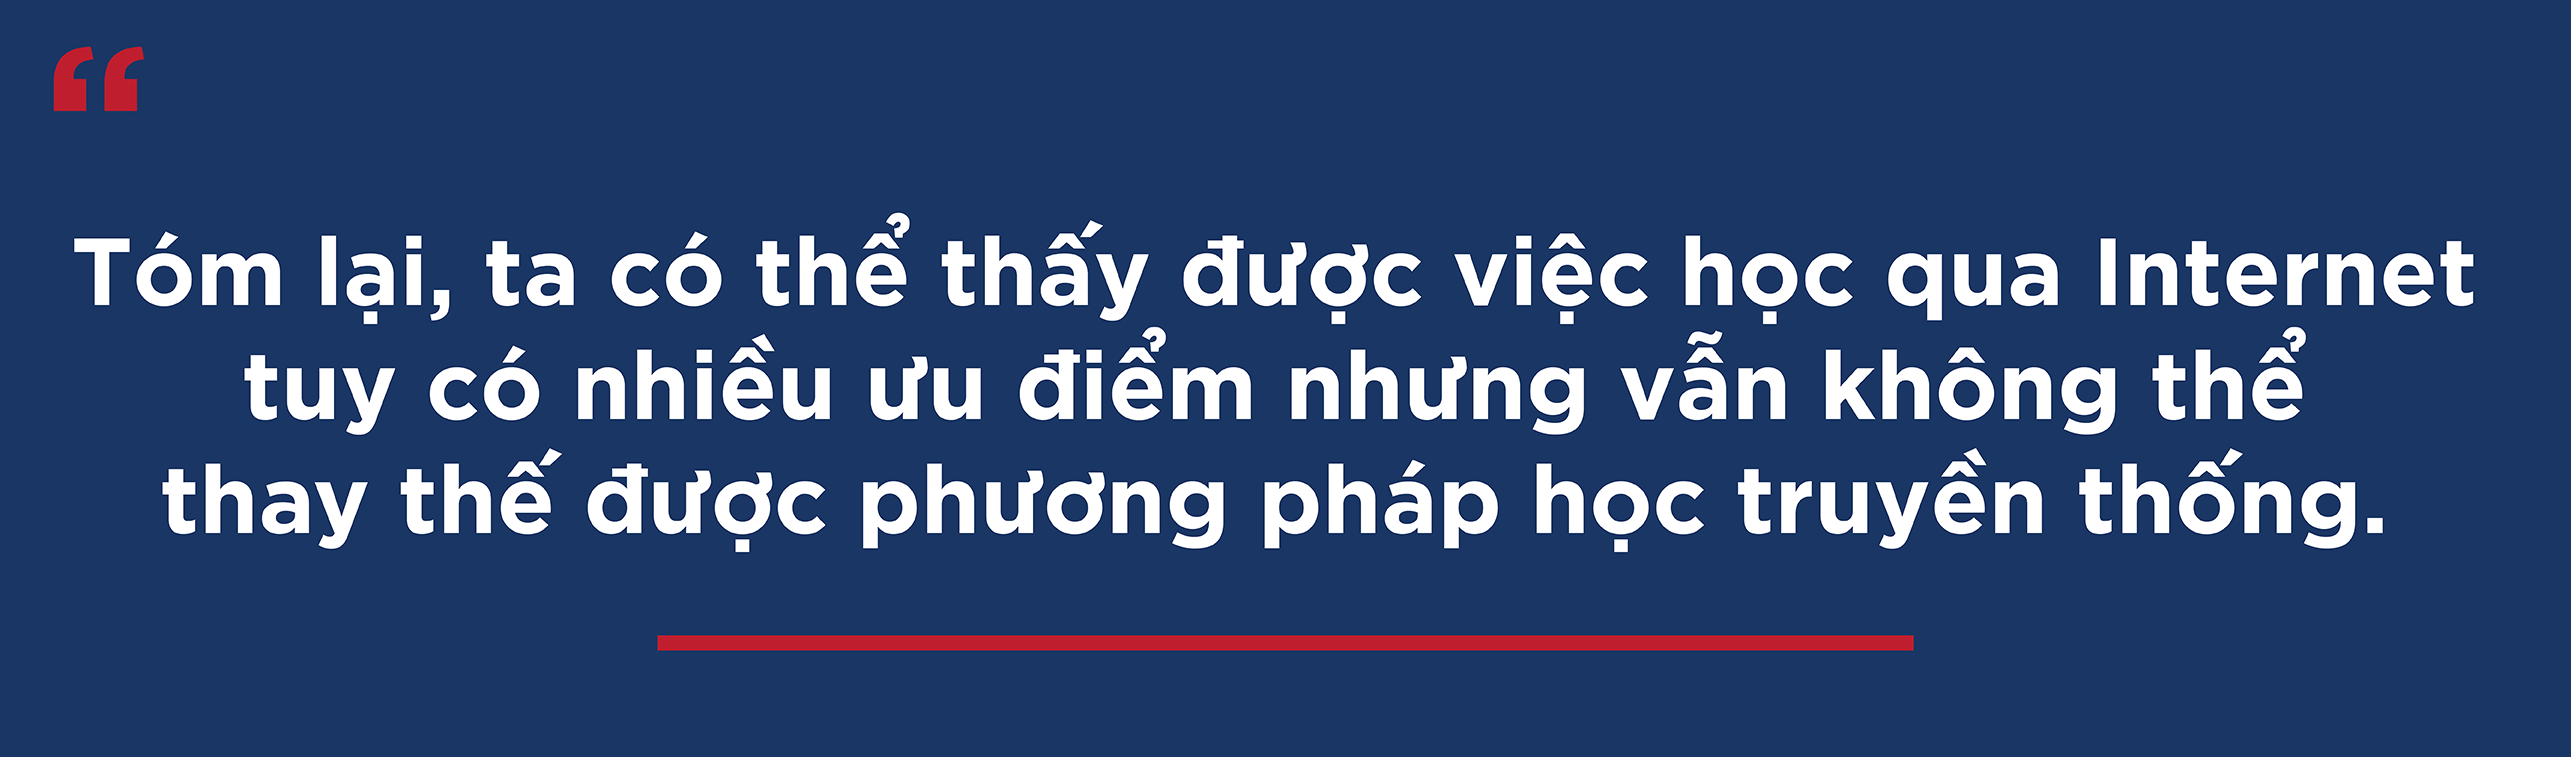 kết luận-08.png -0